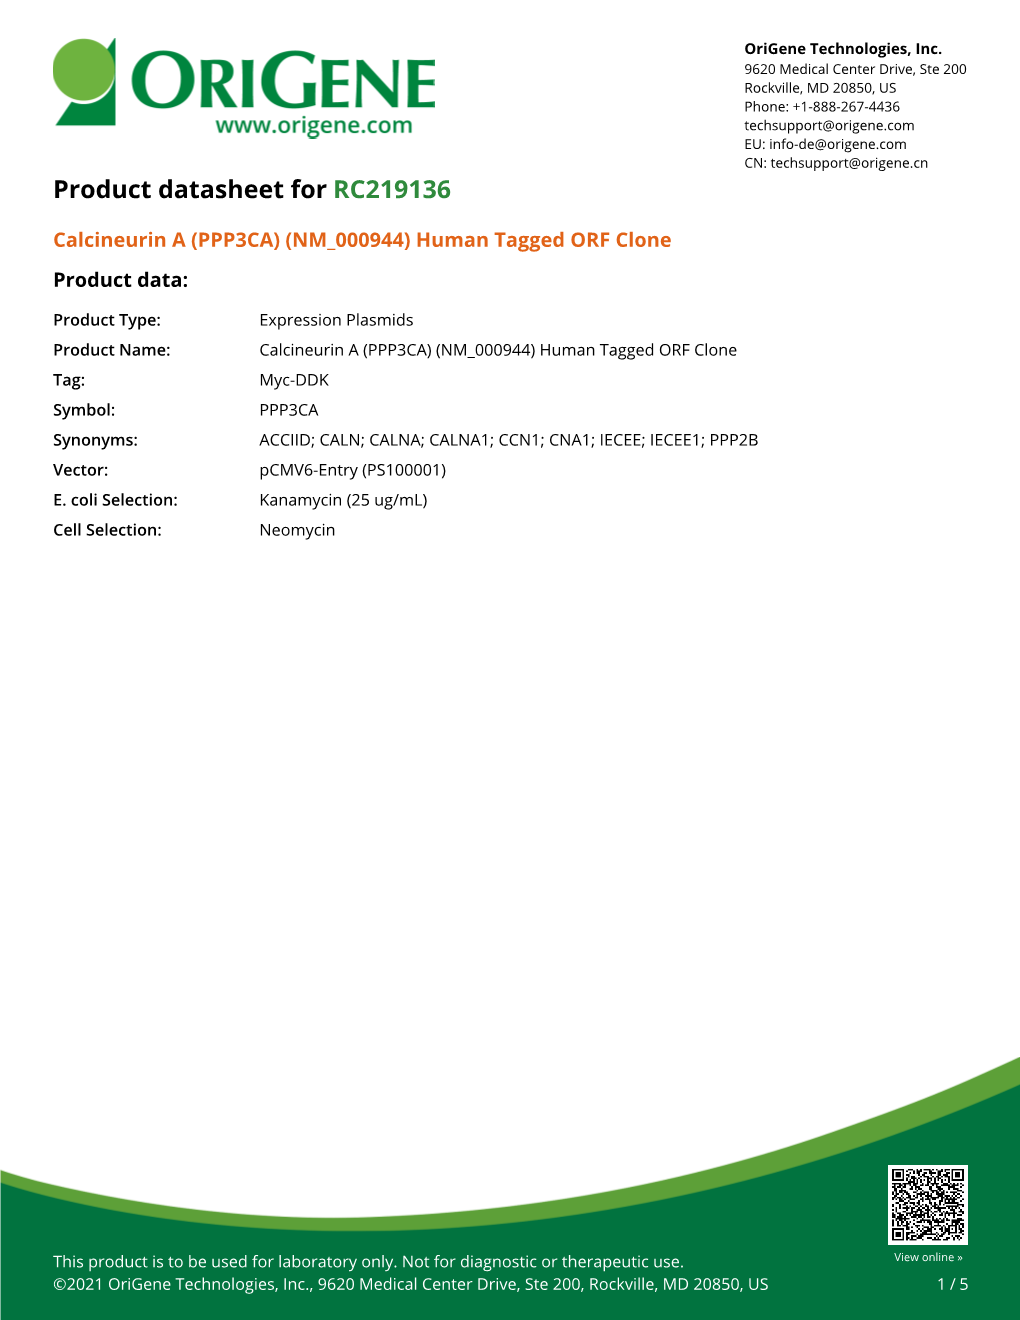 Calcineurin a (PPP3CA) (NM 000944) Human Tagged ORF Clone Product Data